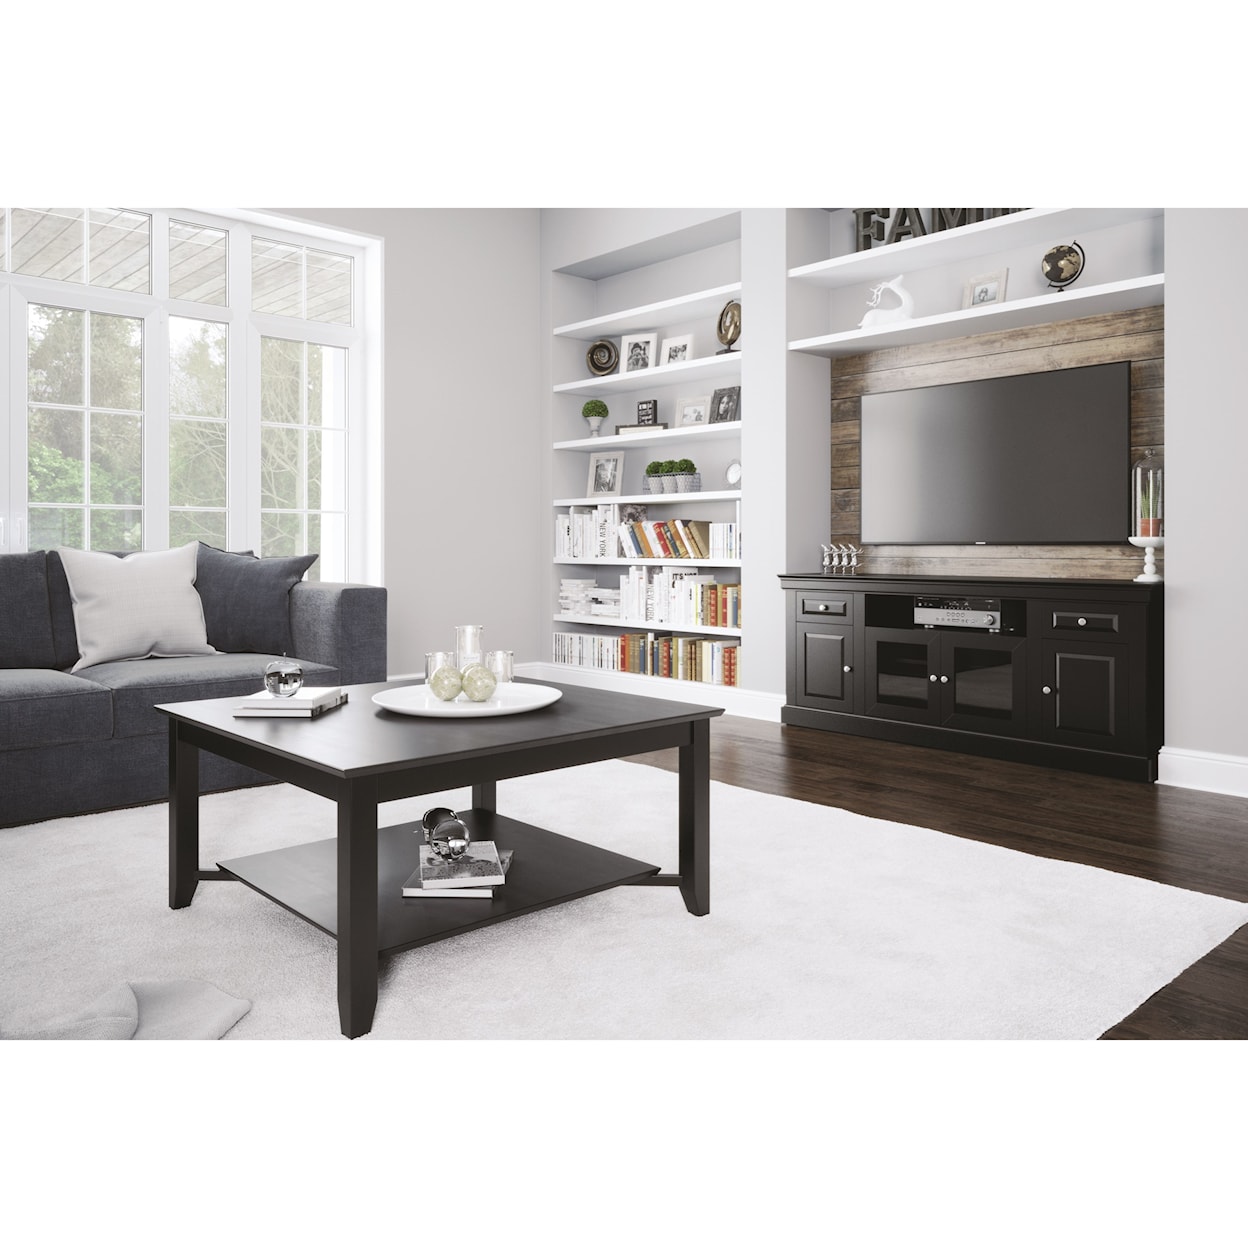 Canadel Canadel Living Customizable Rectangular Coffee Table